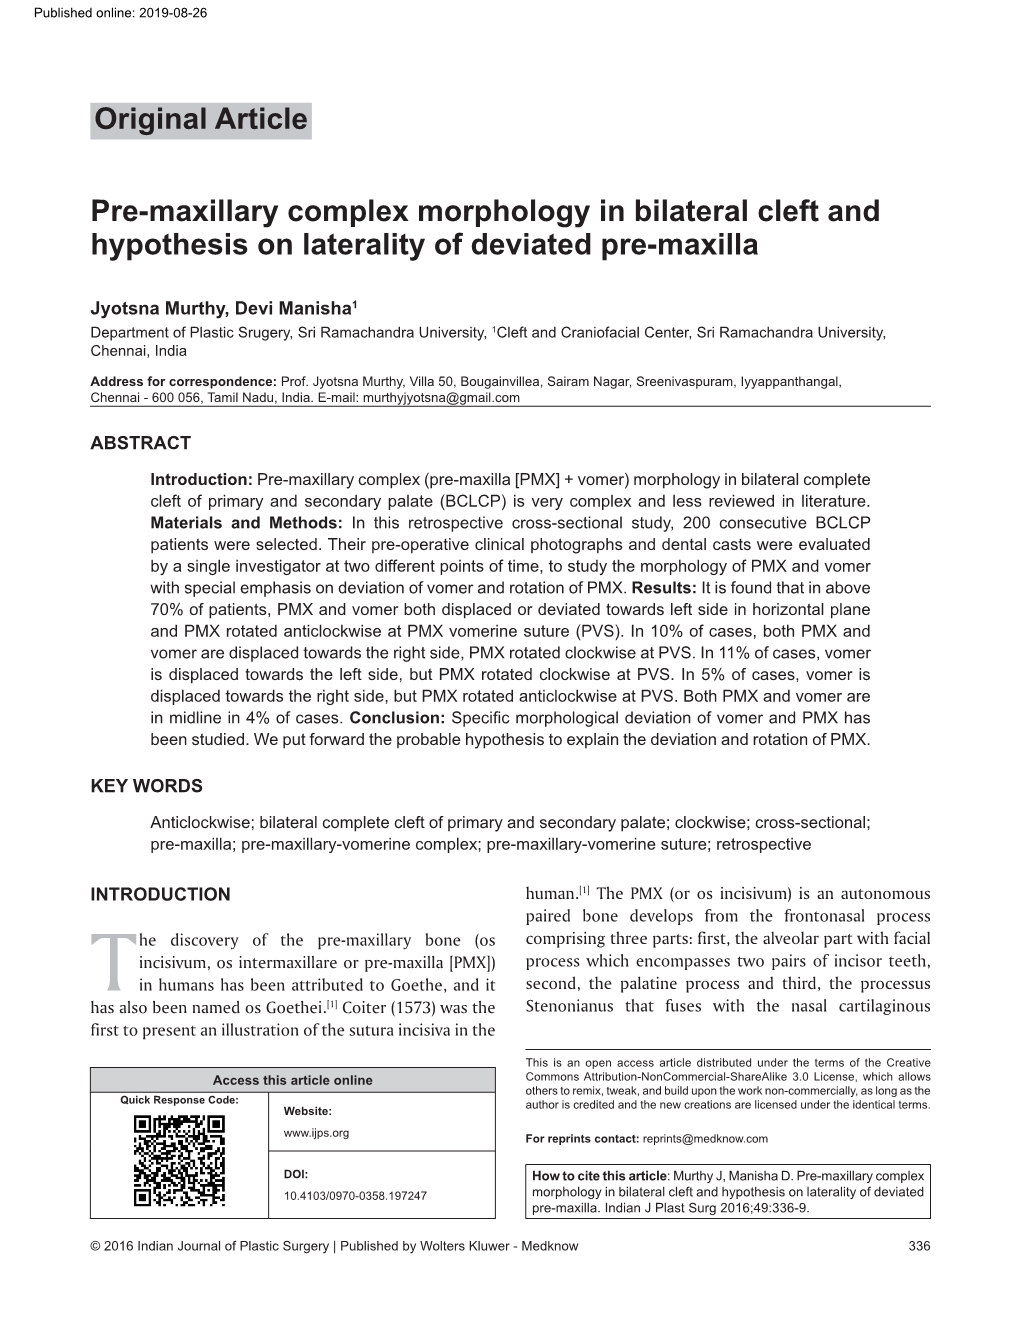 Pre‑Maxillary Complex Morphology in Bilateral Cleft and Hypothesis on Laterality of Deviated Pre‑Maxilla Original Article